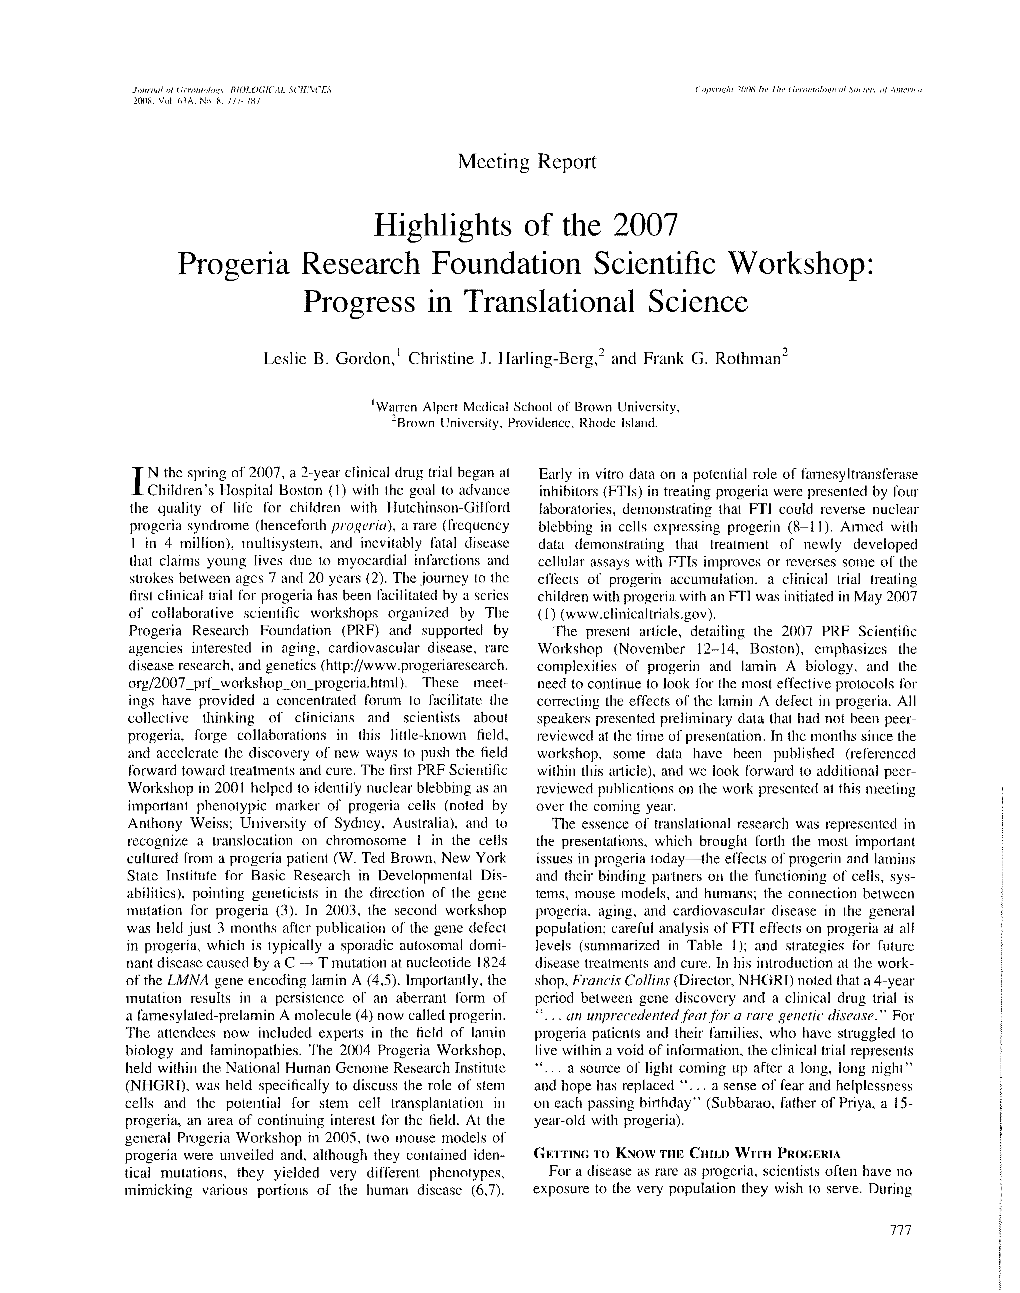 Highlights of the 2007 Progeria Research Foundation Scientific